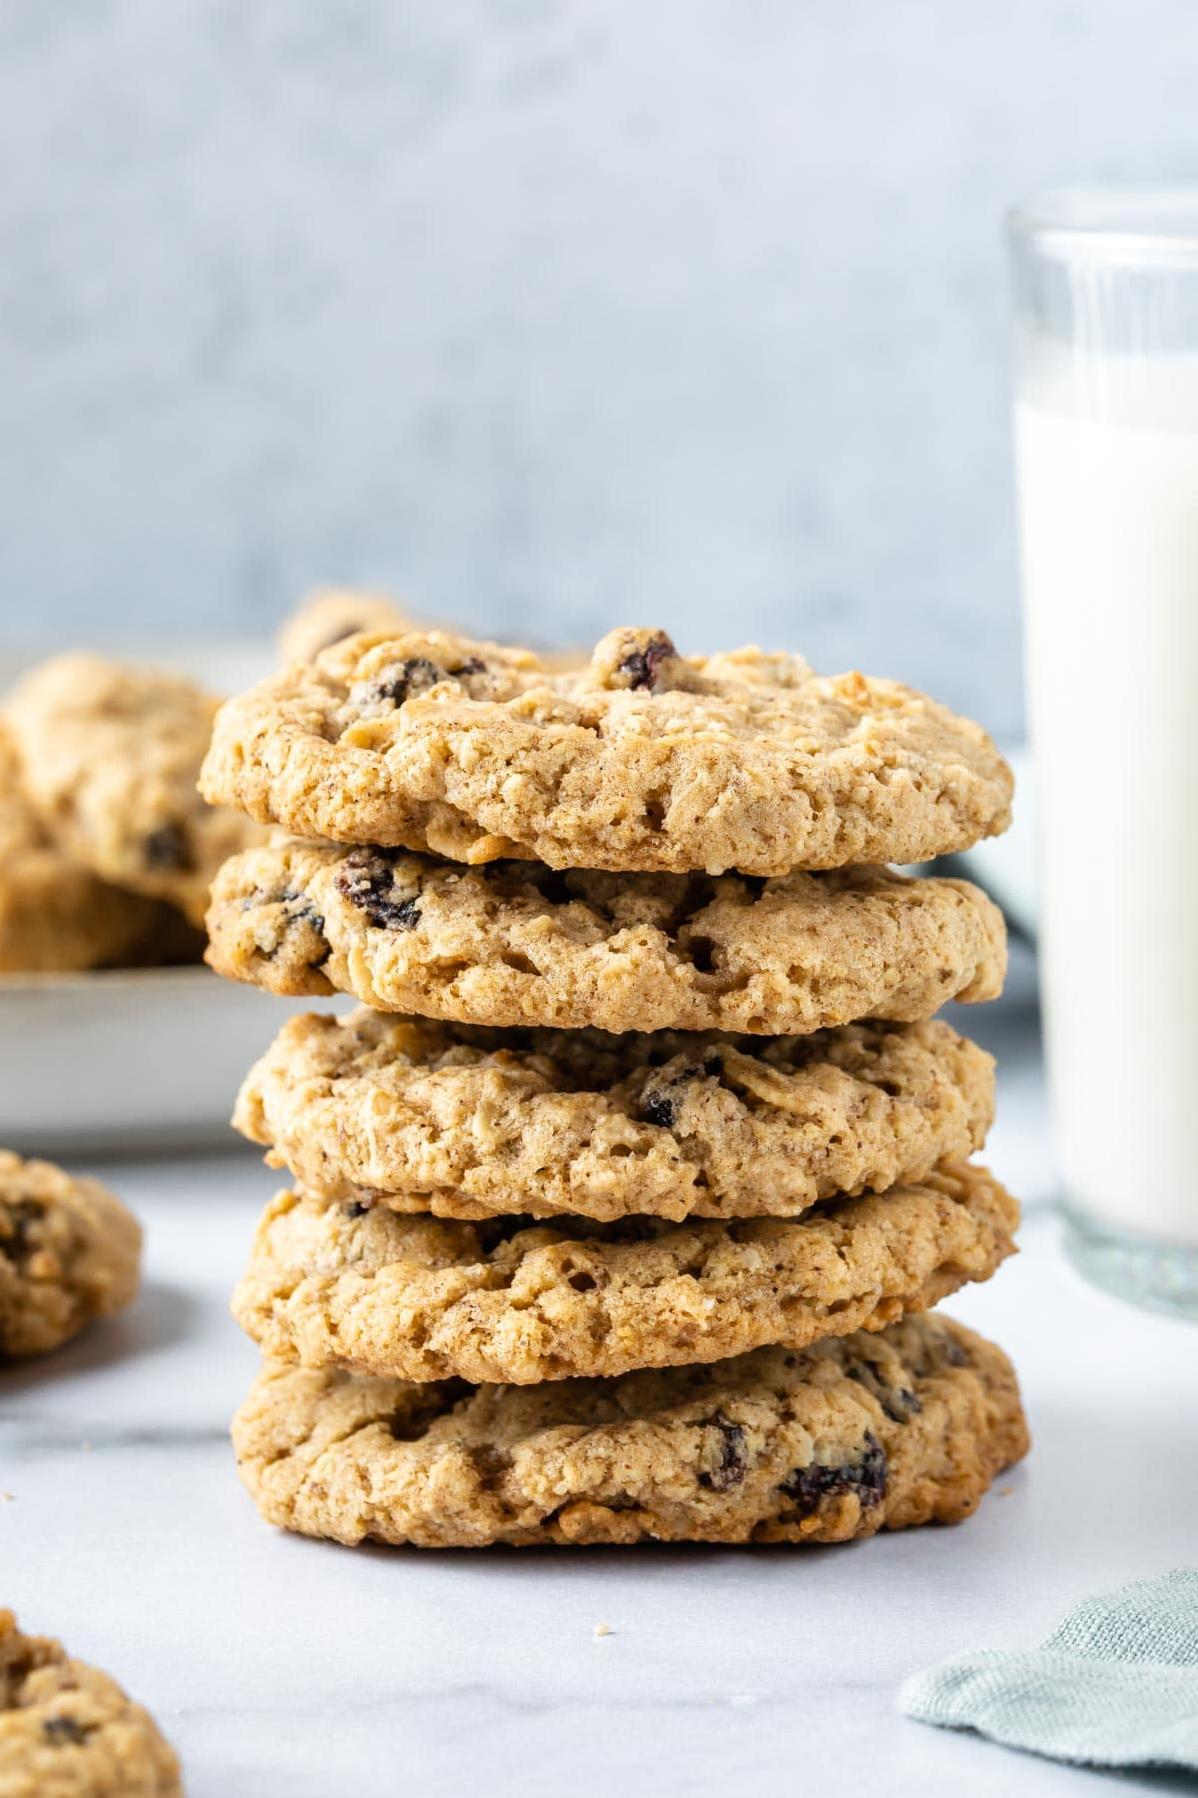  These cookies are so delicious, you won't even miss the dairy!